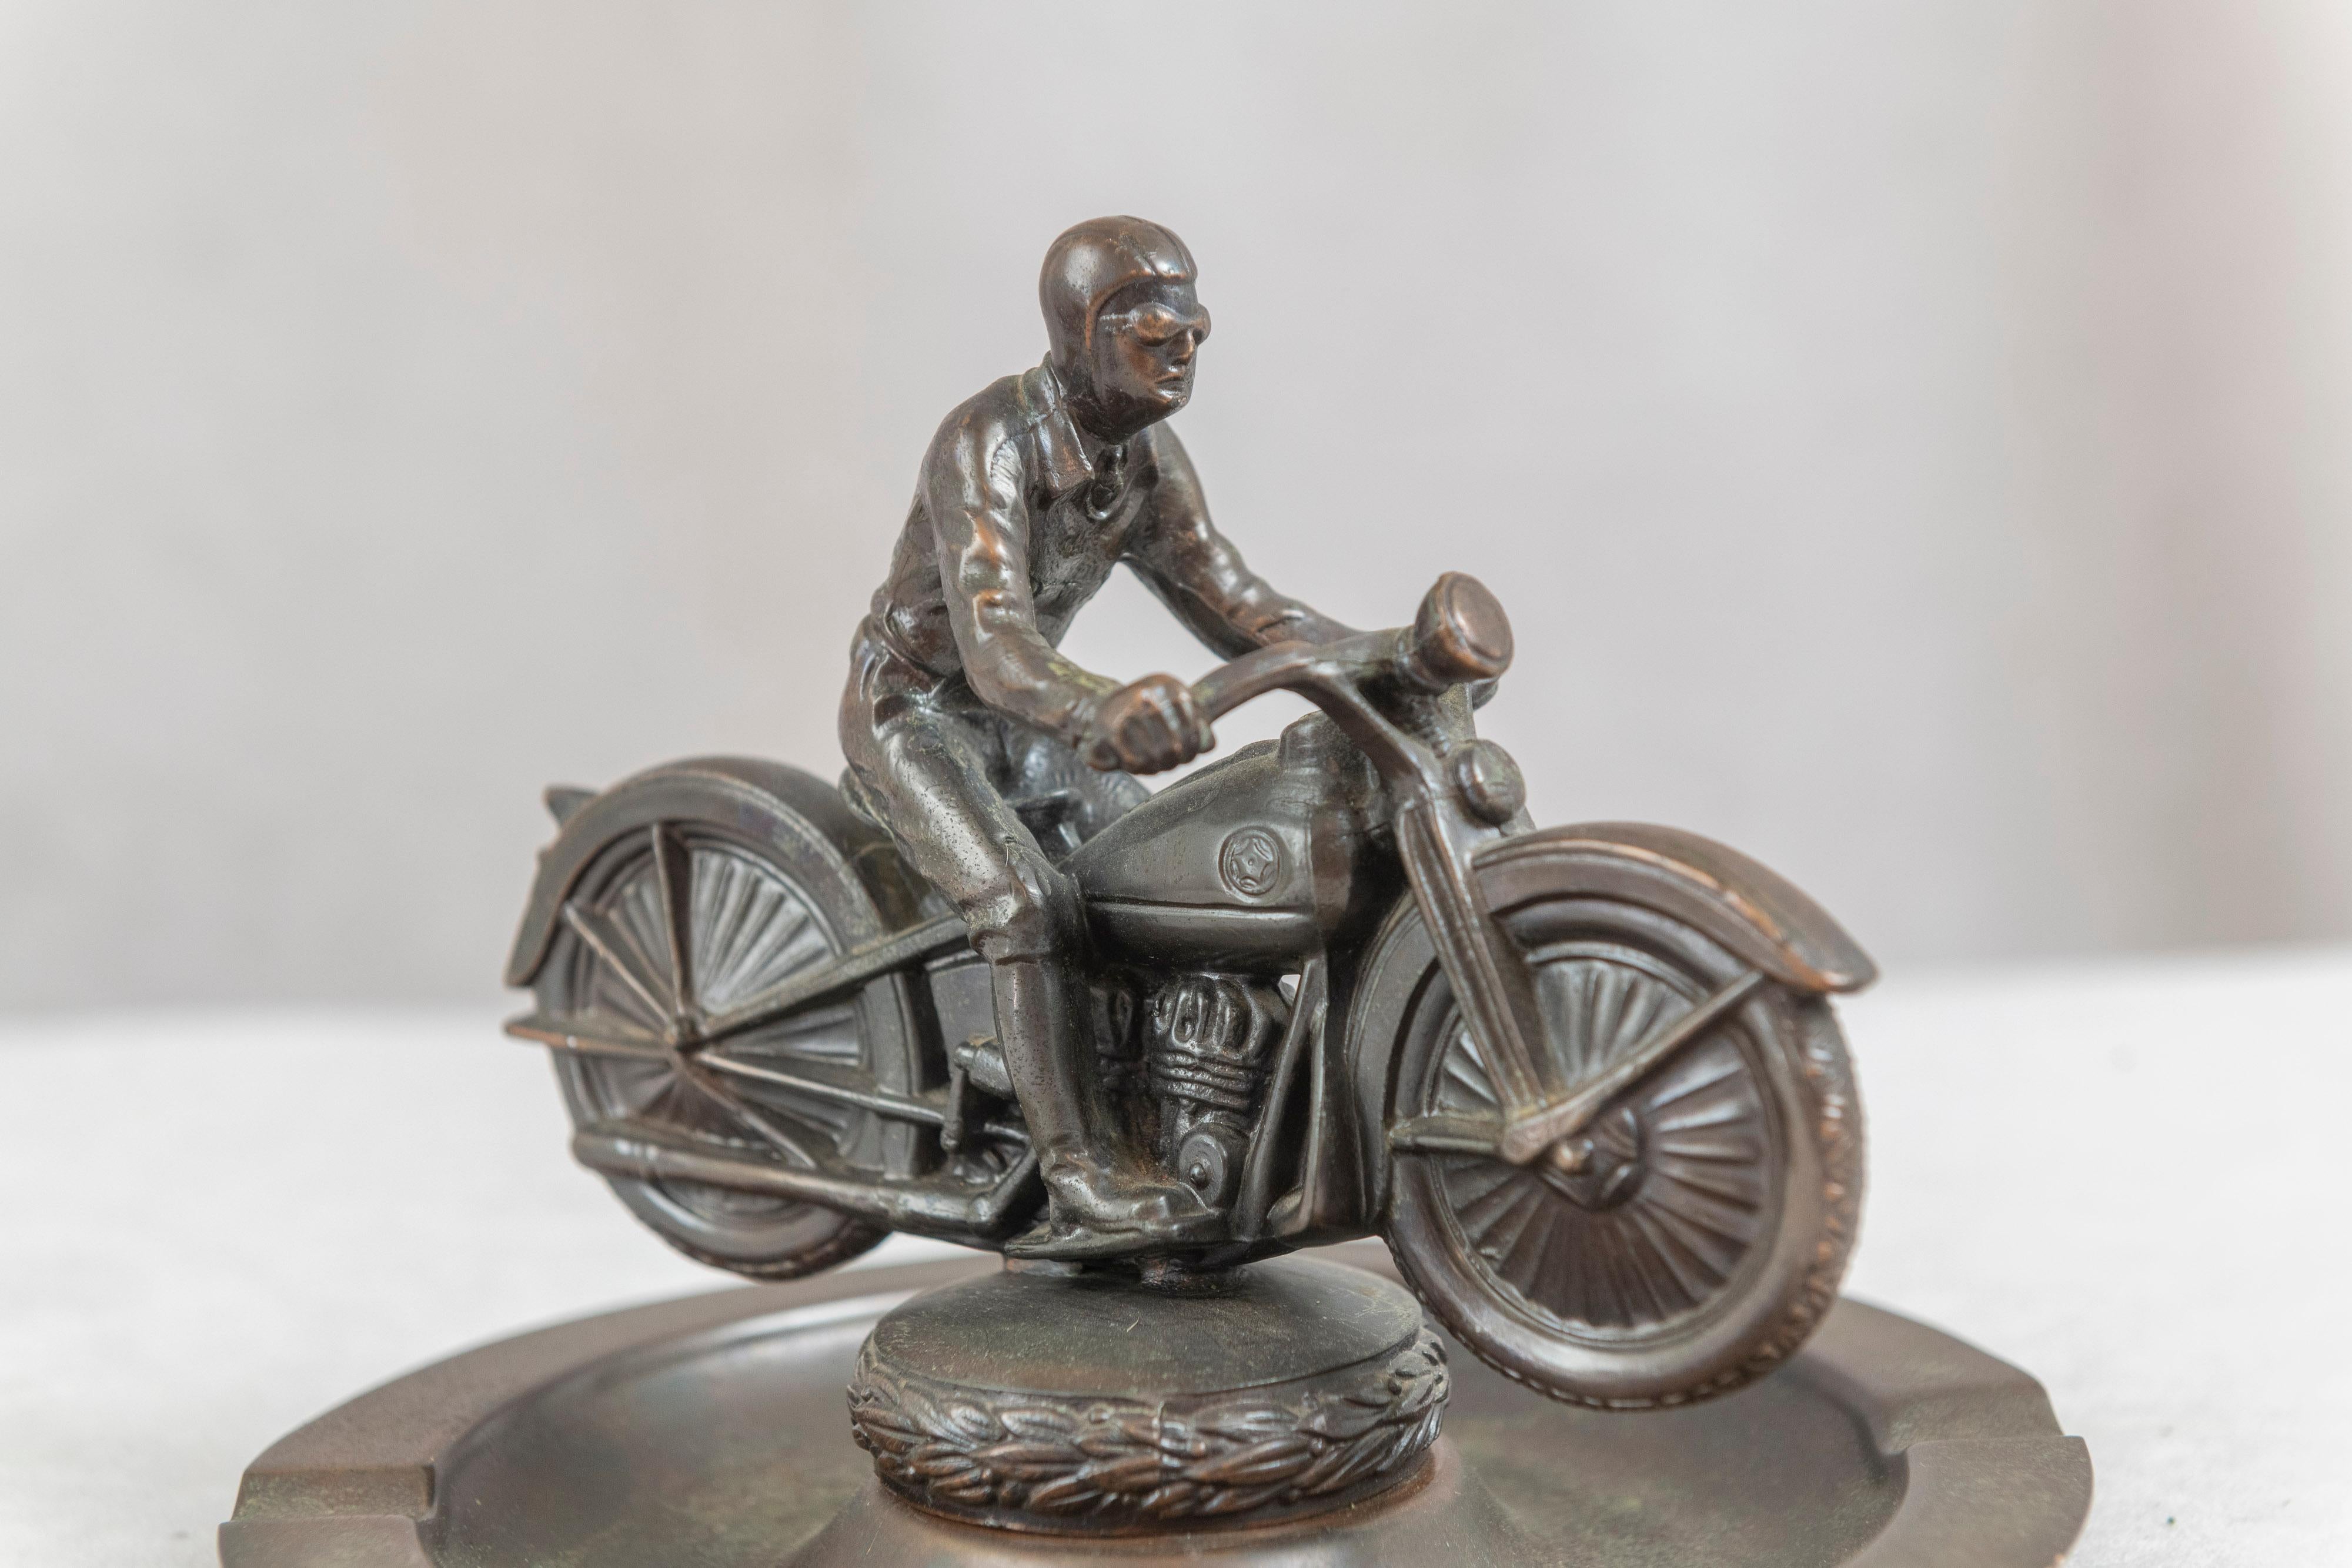   For those who loves motorcycles, here is a little gem. Beautifully cast and finished in a warm dark brown with hints of copper showing through, not quite what is referred to as 